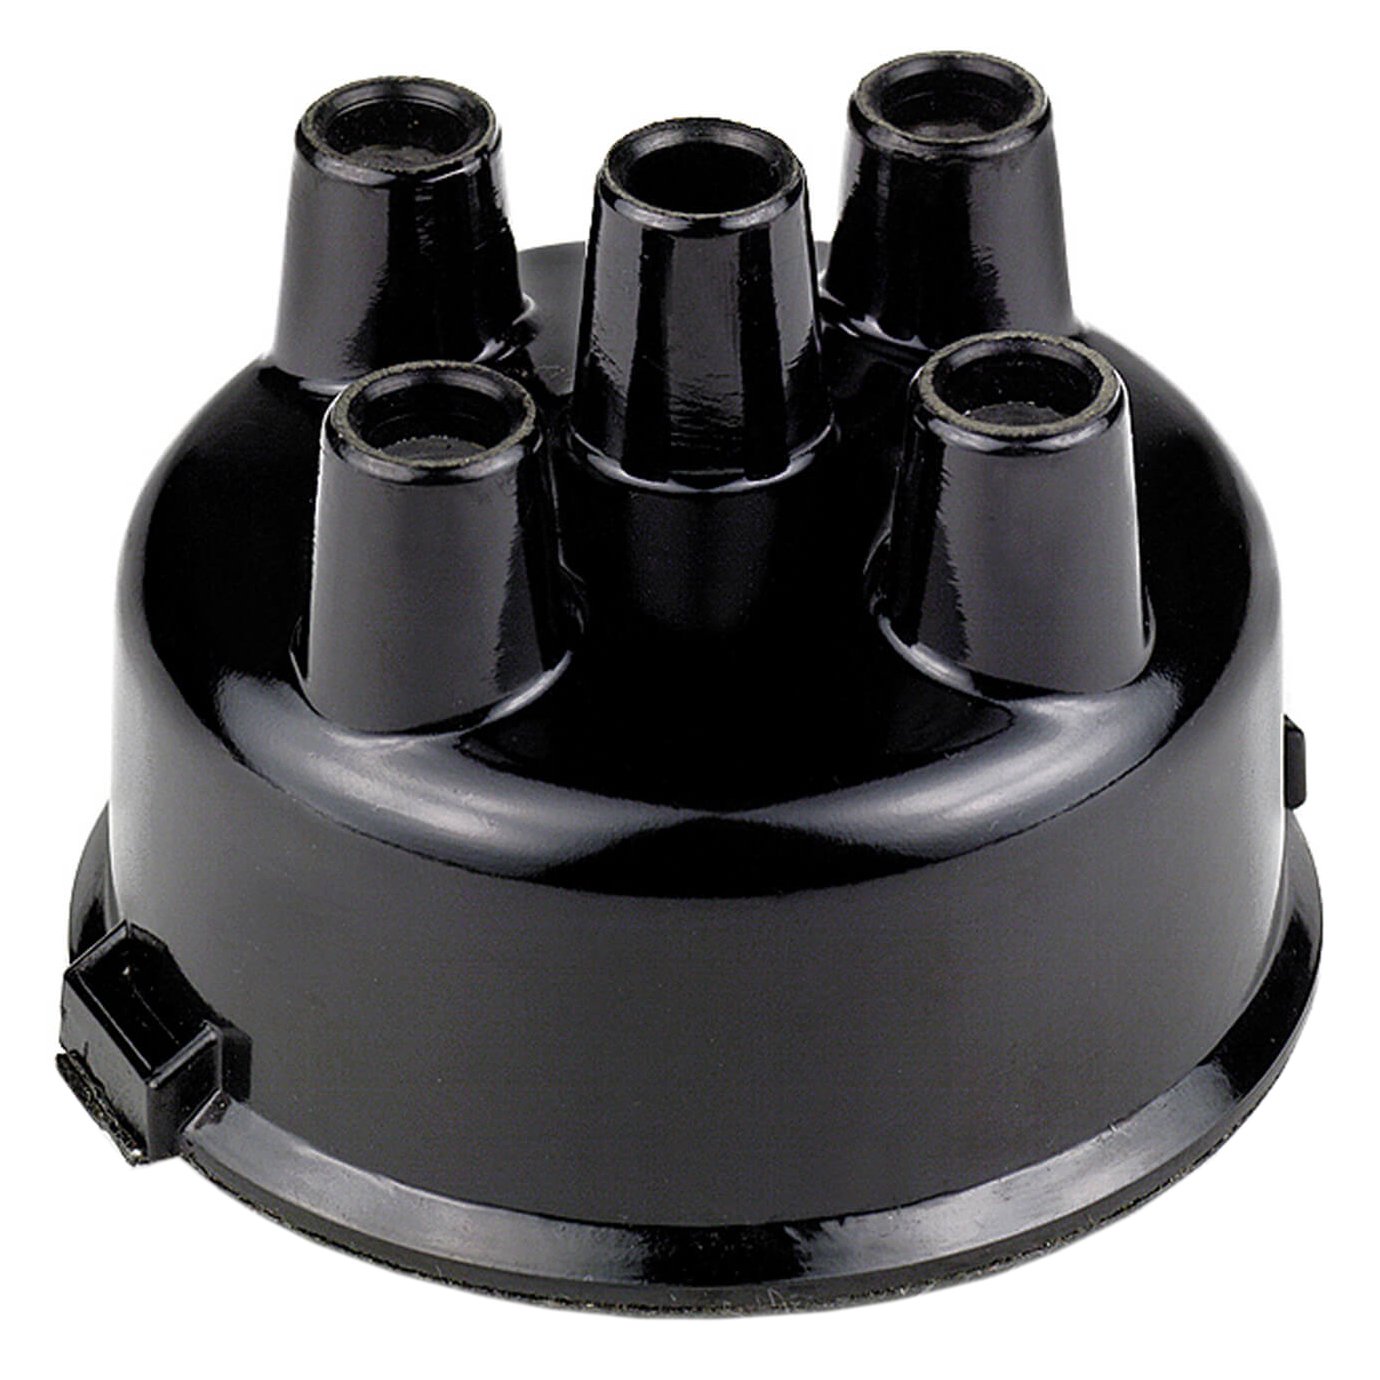 Female Distributor Cap For Mallory Series 25, 26, 37, 38, & vented non-flame arrested YL